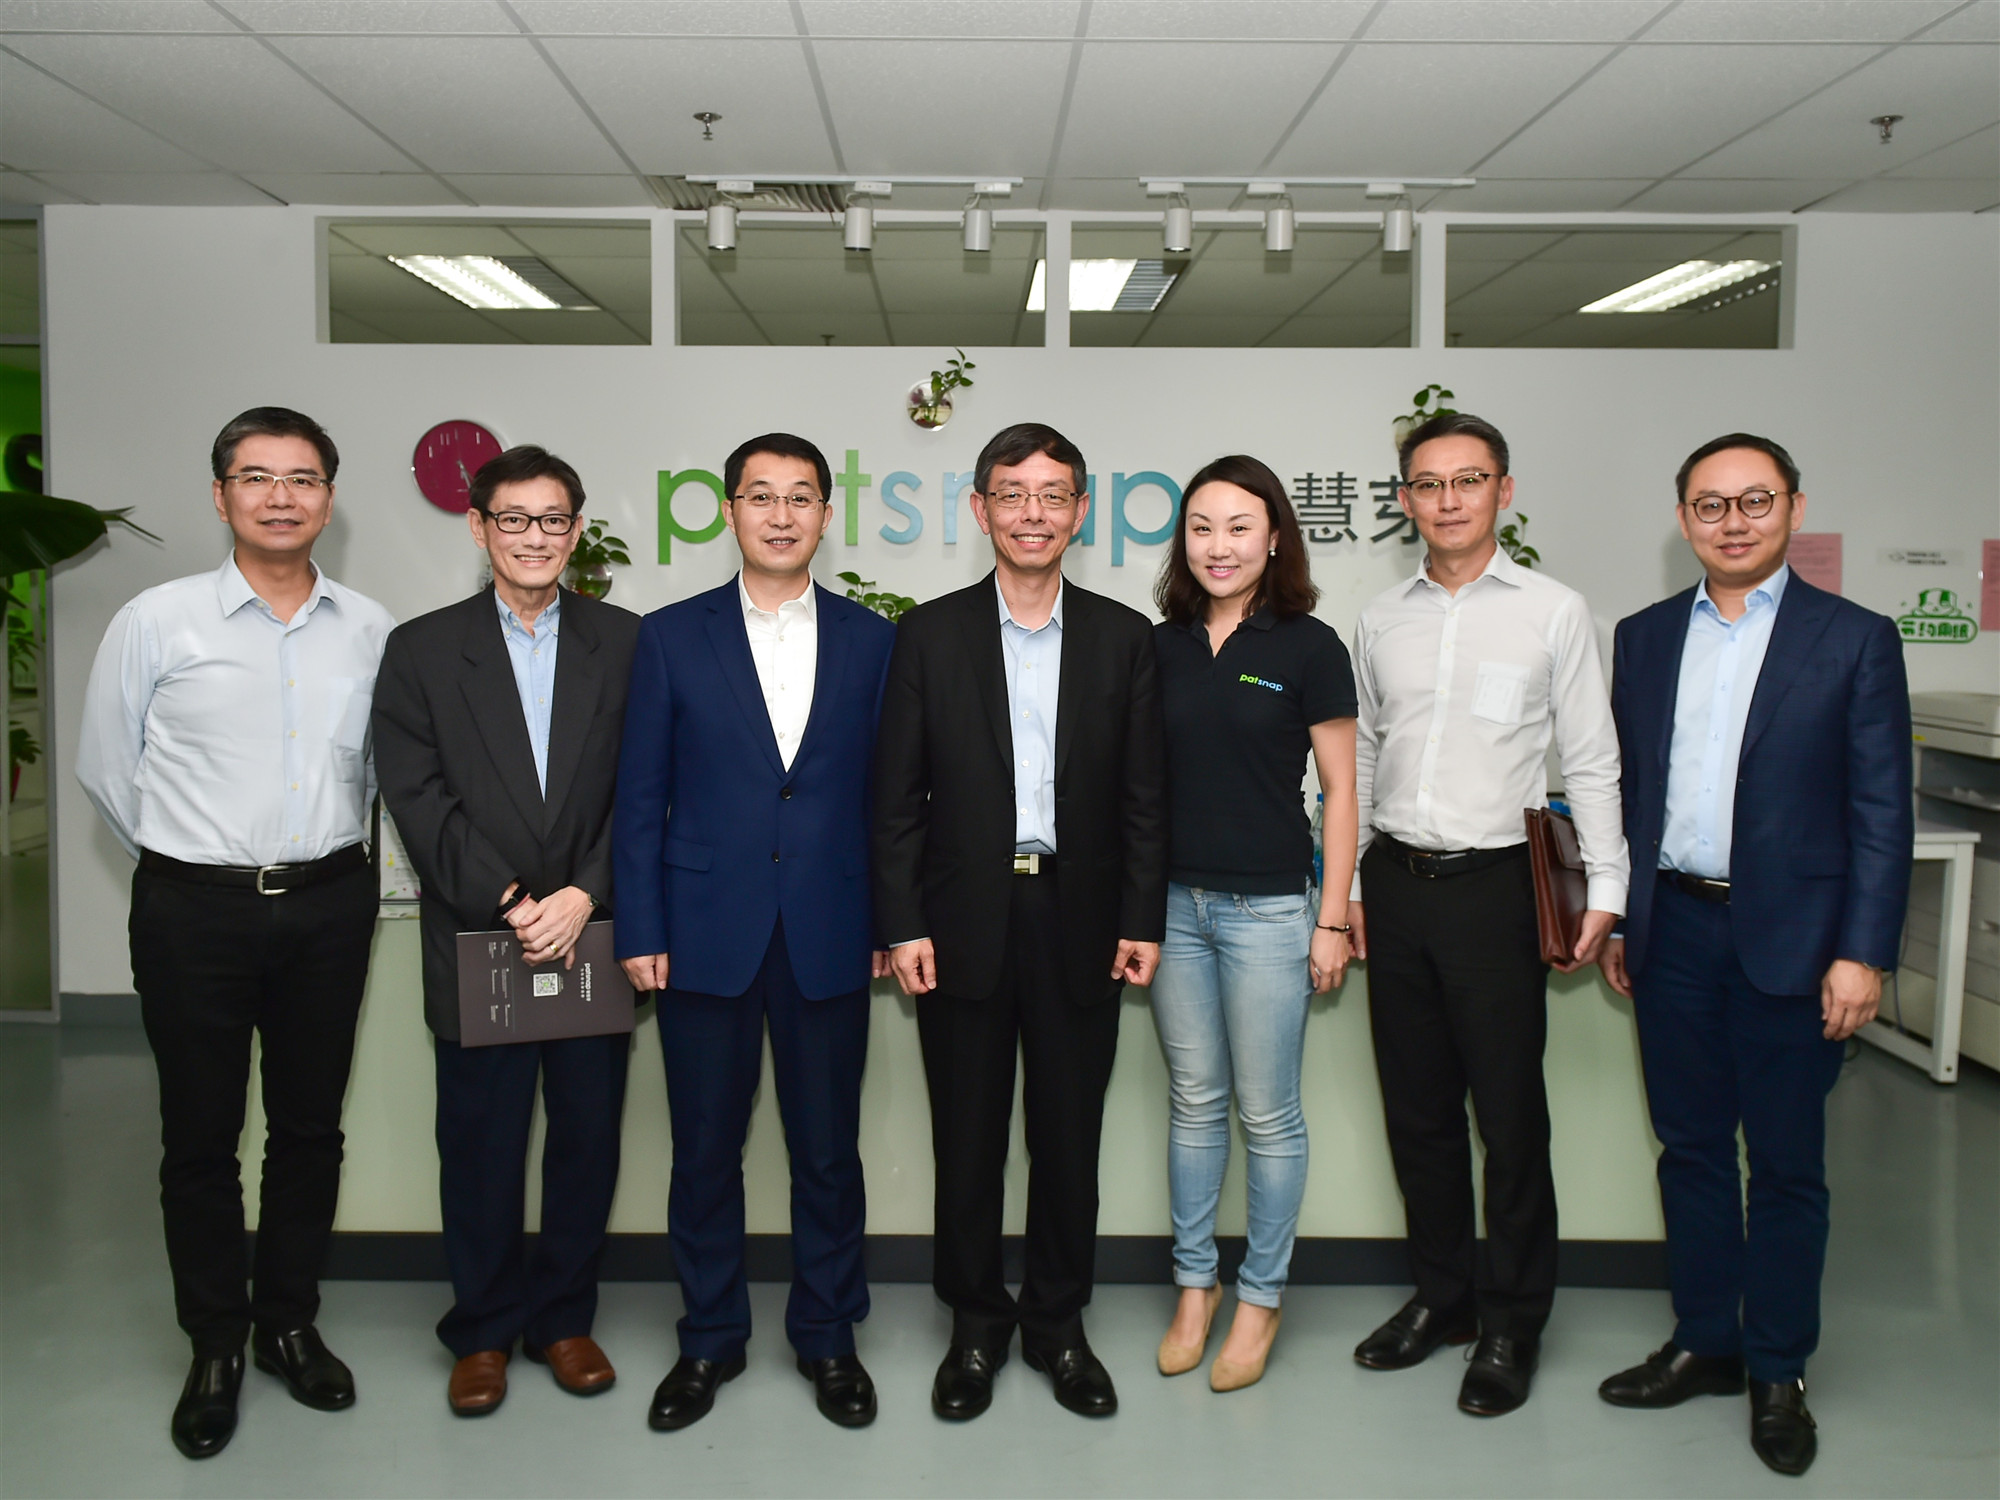 A tripartite delegation from the Ministry of Trade and Industry, Enterprise Singapore and Suzhou Industrial Park Administrative Committee visits NUSRI